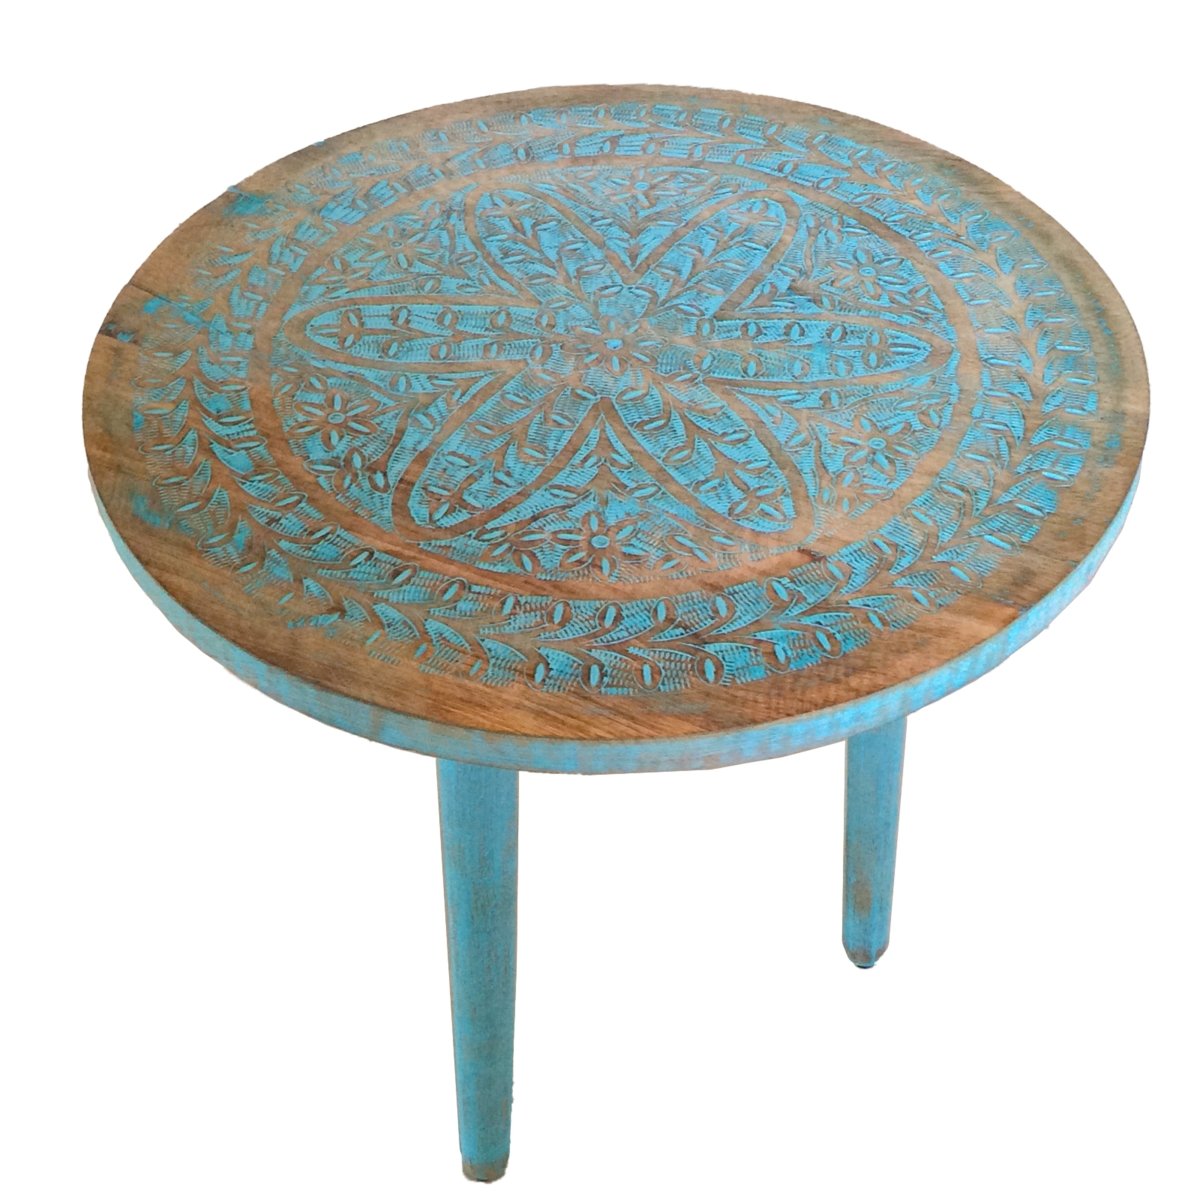 Kezevel Wooden Decorative Accent Table - Round Brown Blue Handcrafted Vintage End Table, Bedside Table, Side Stand, Stool